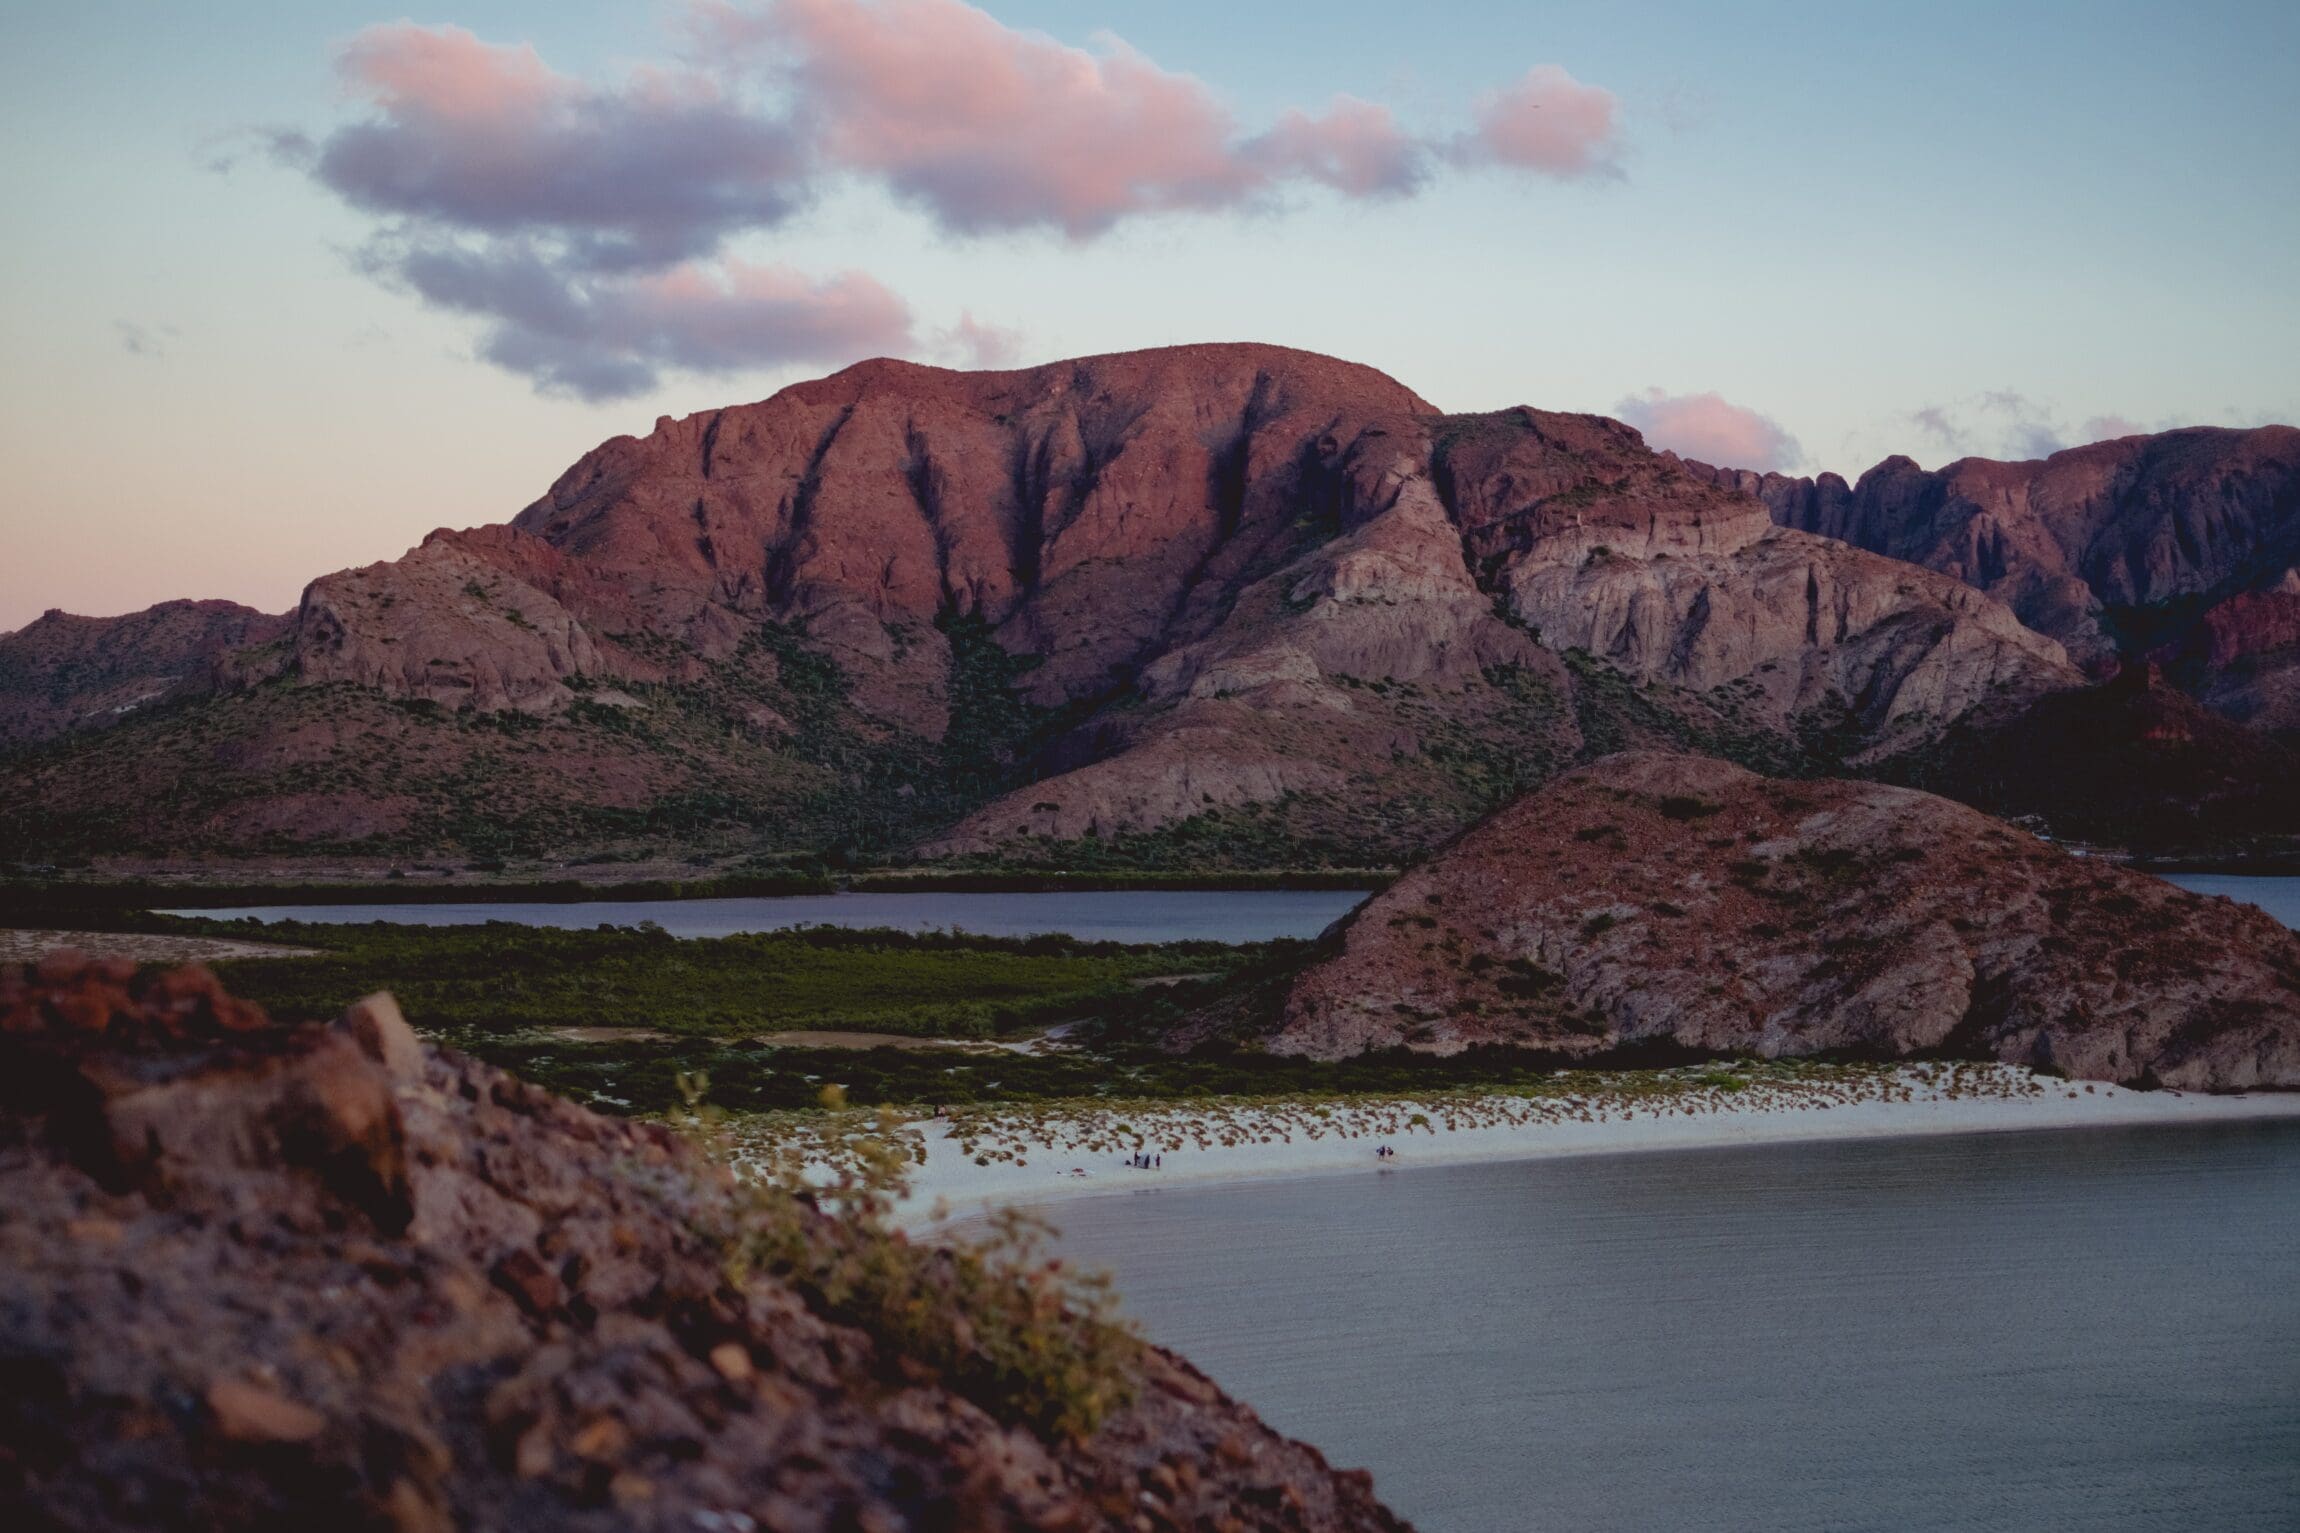 Mountains catching the last light of the day in Baja California Sur, Mexico